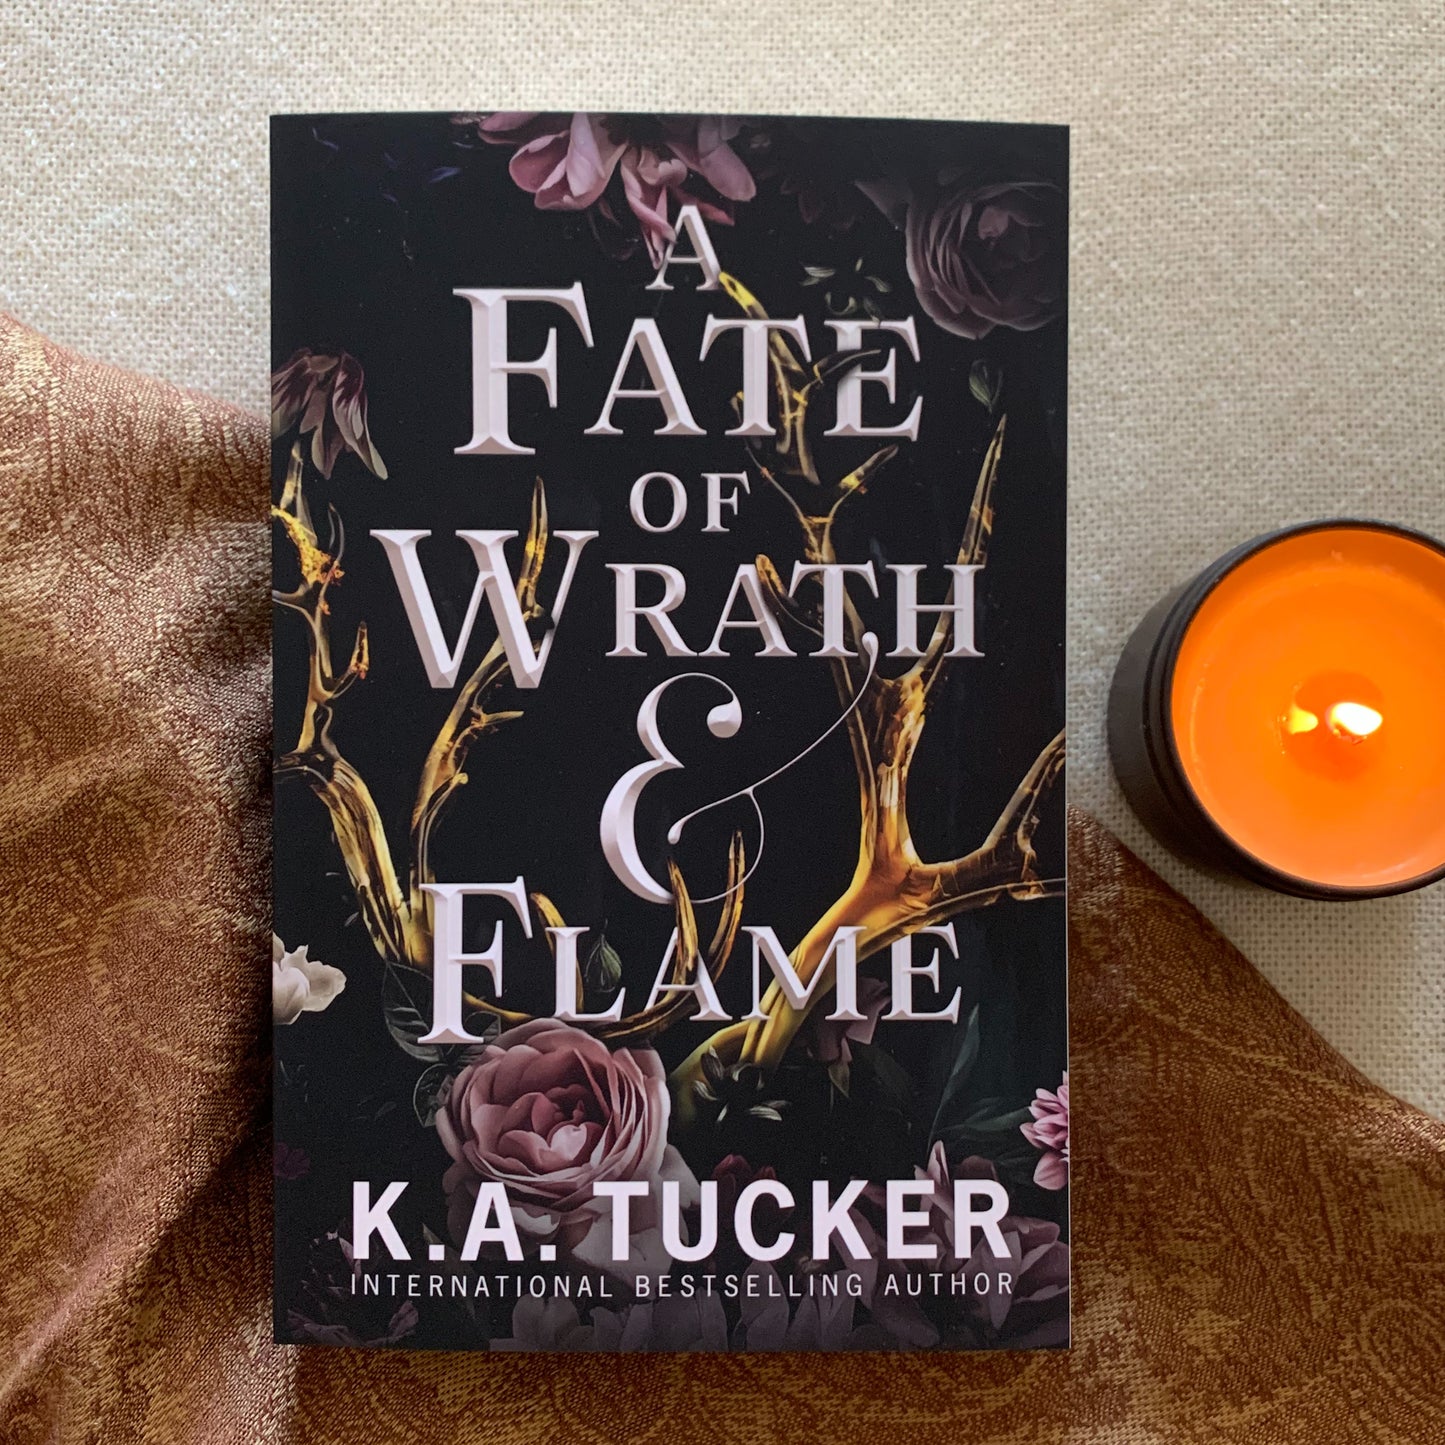 A Fate of Wrath & Flame by K. A. Tucker